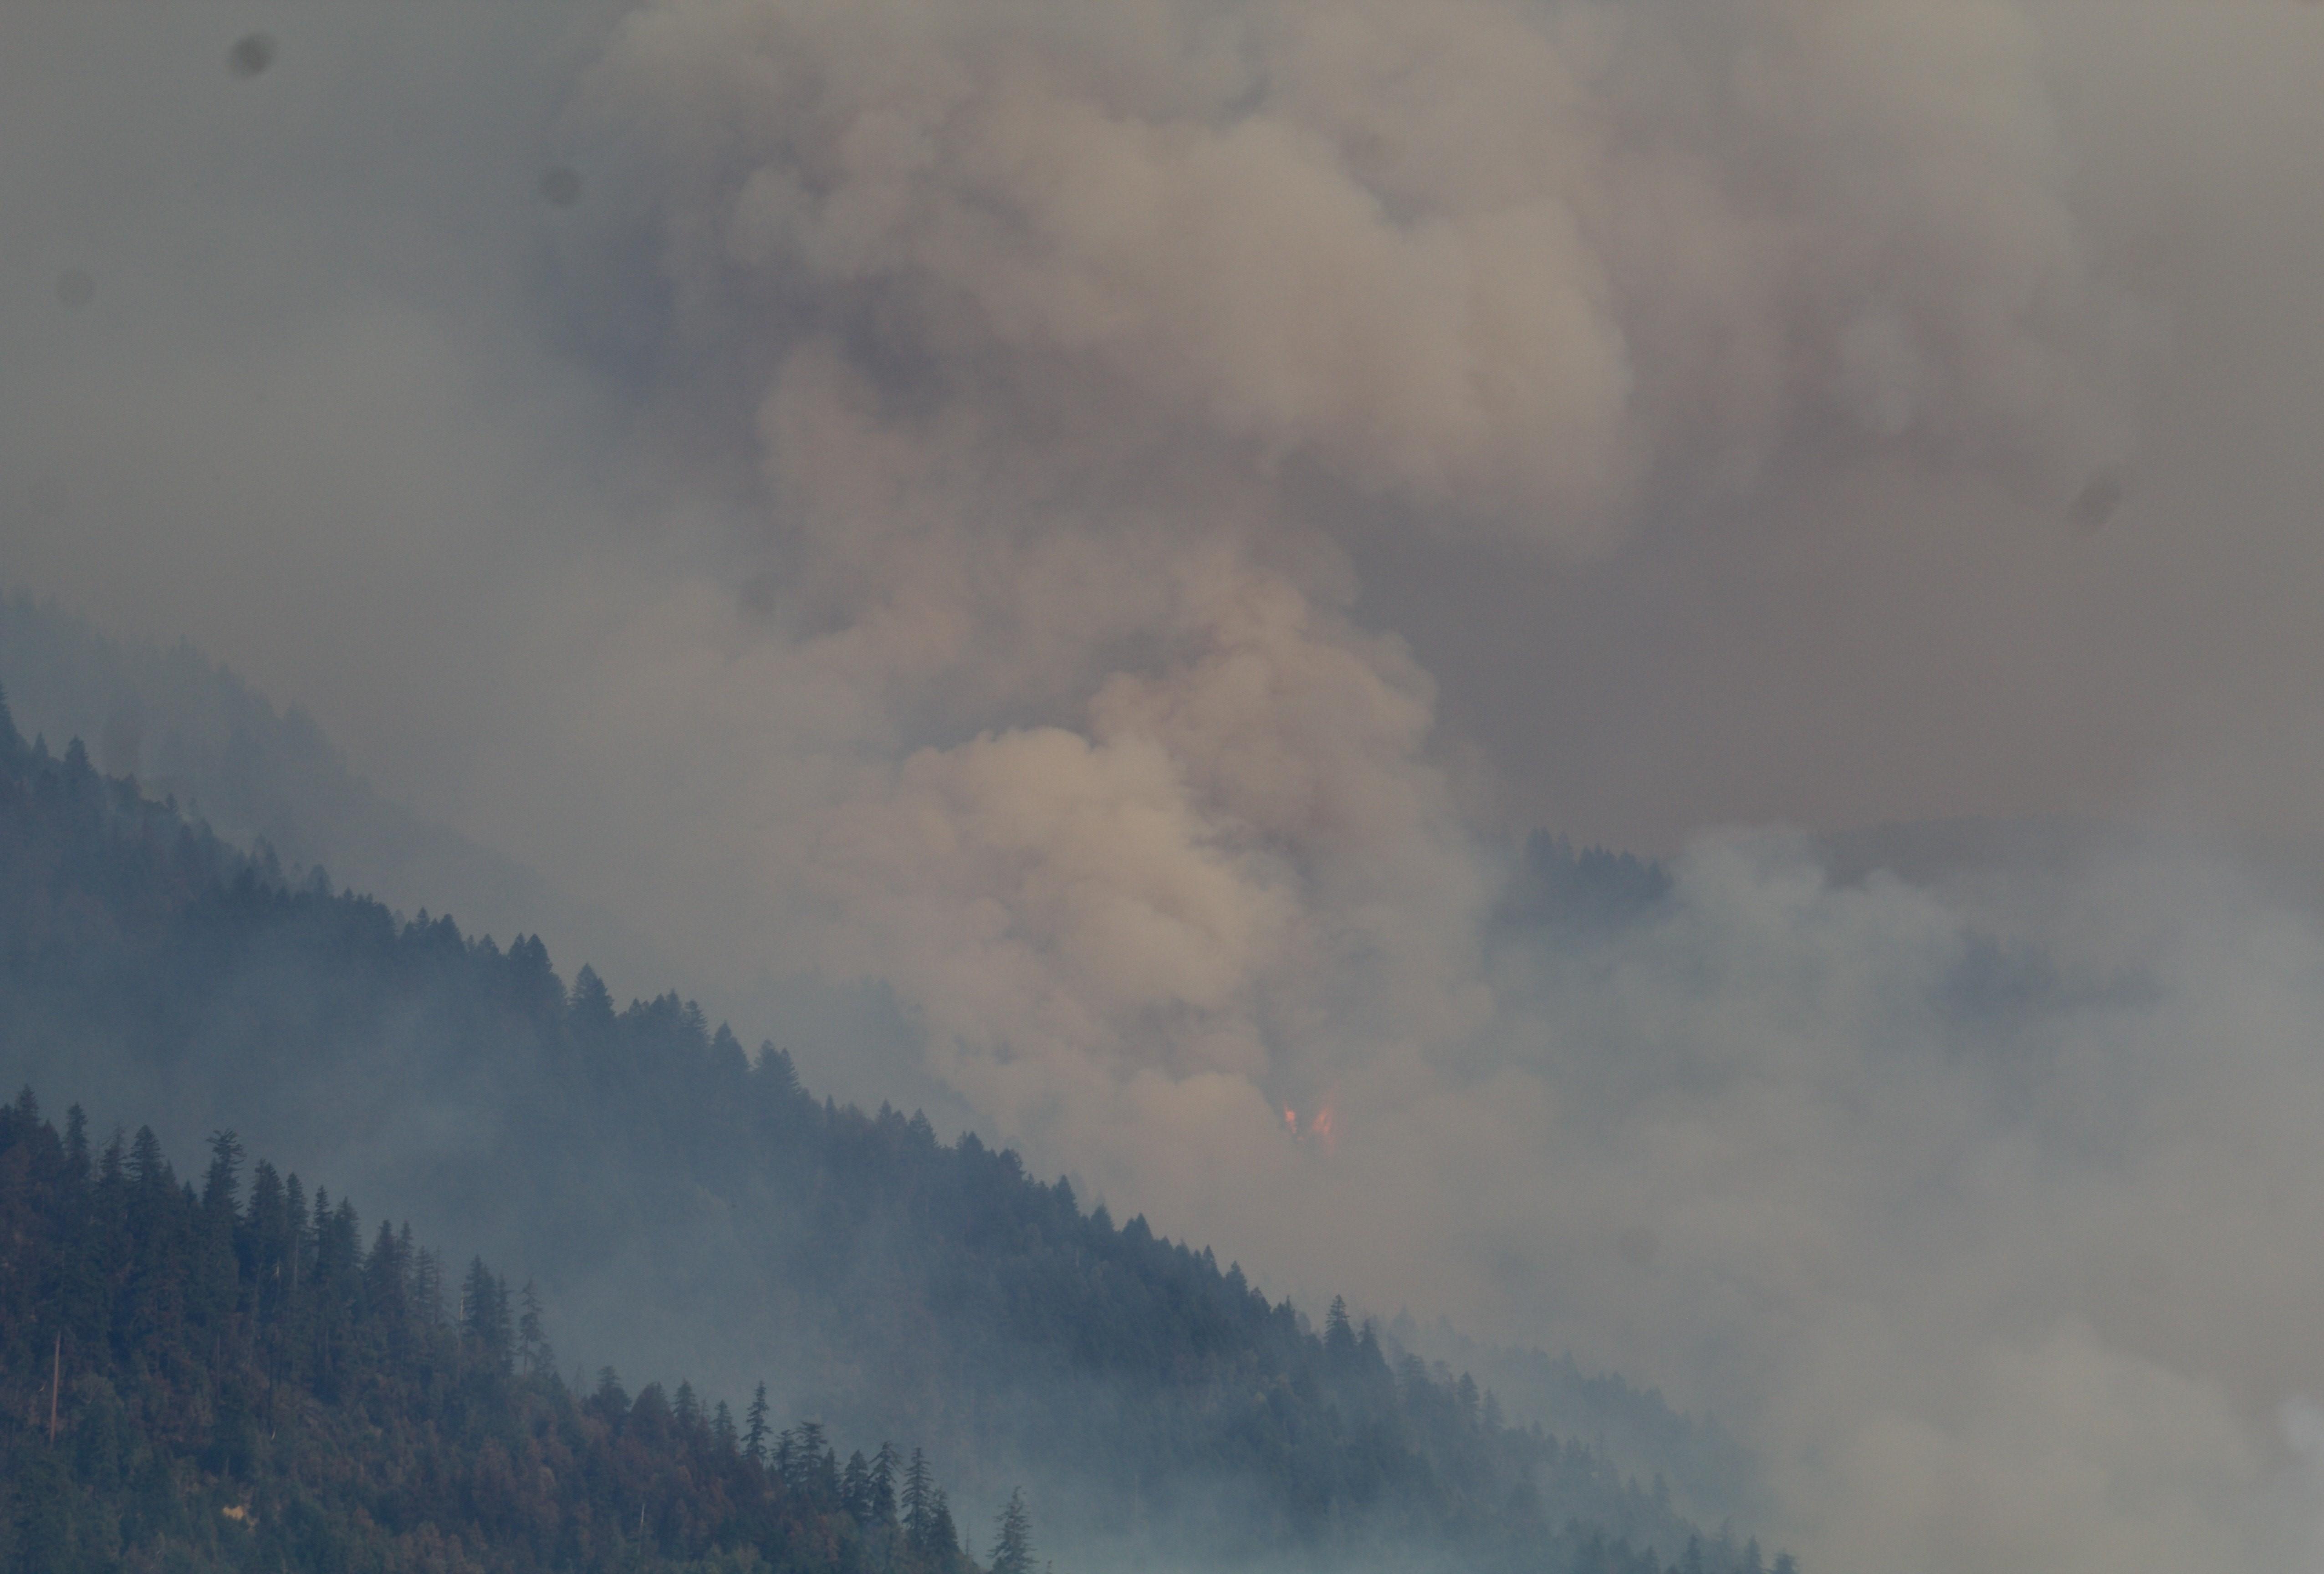 A small area of orange flames burning in a tree-covered mountain range surrounded by a thick layer of smoke